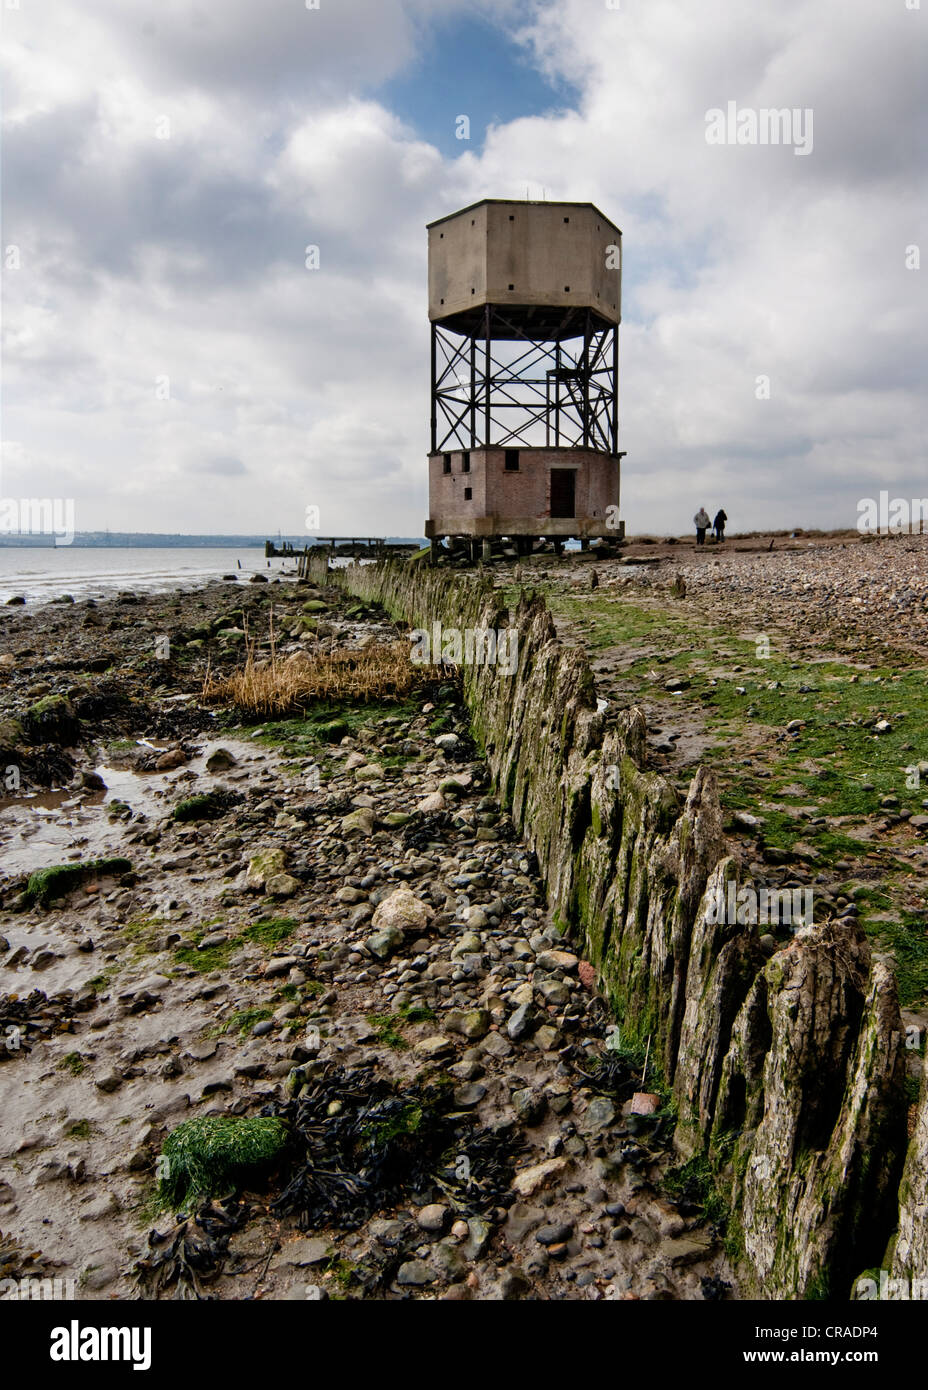 World War 2 (WWII) radar control tower disguised as a water tower at Coalhouse Fort, Tilbury, Essex, United Kingdom. Stock Photo